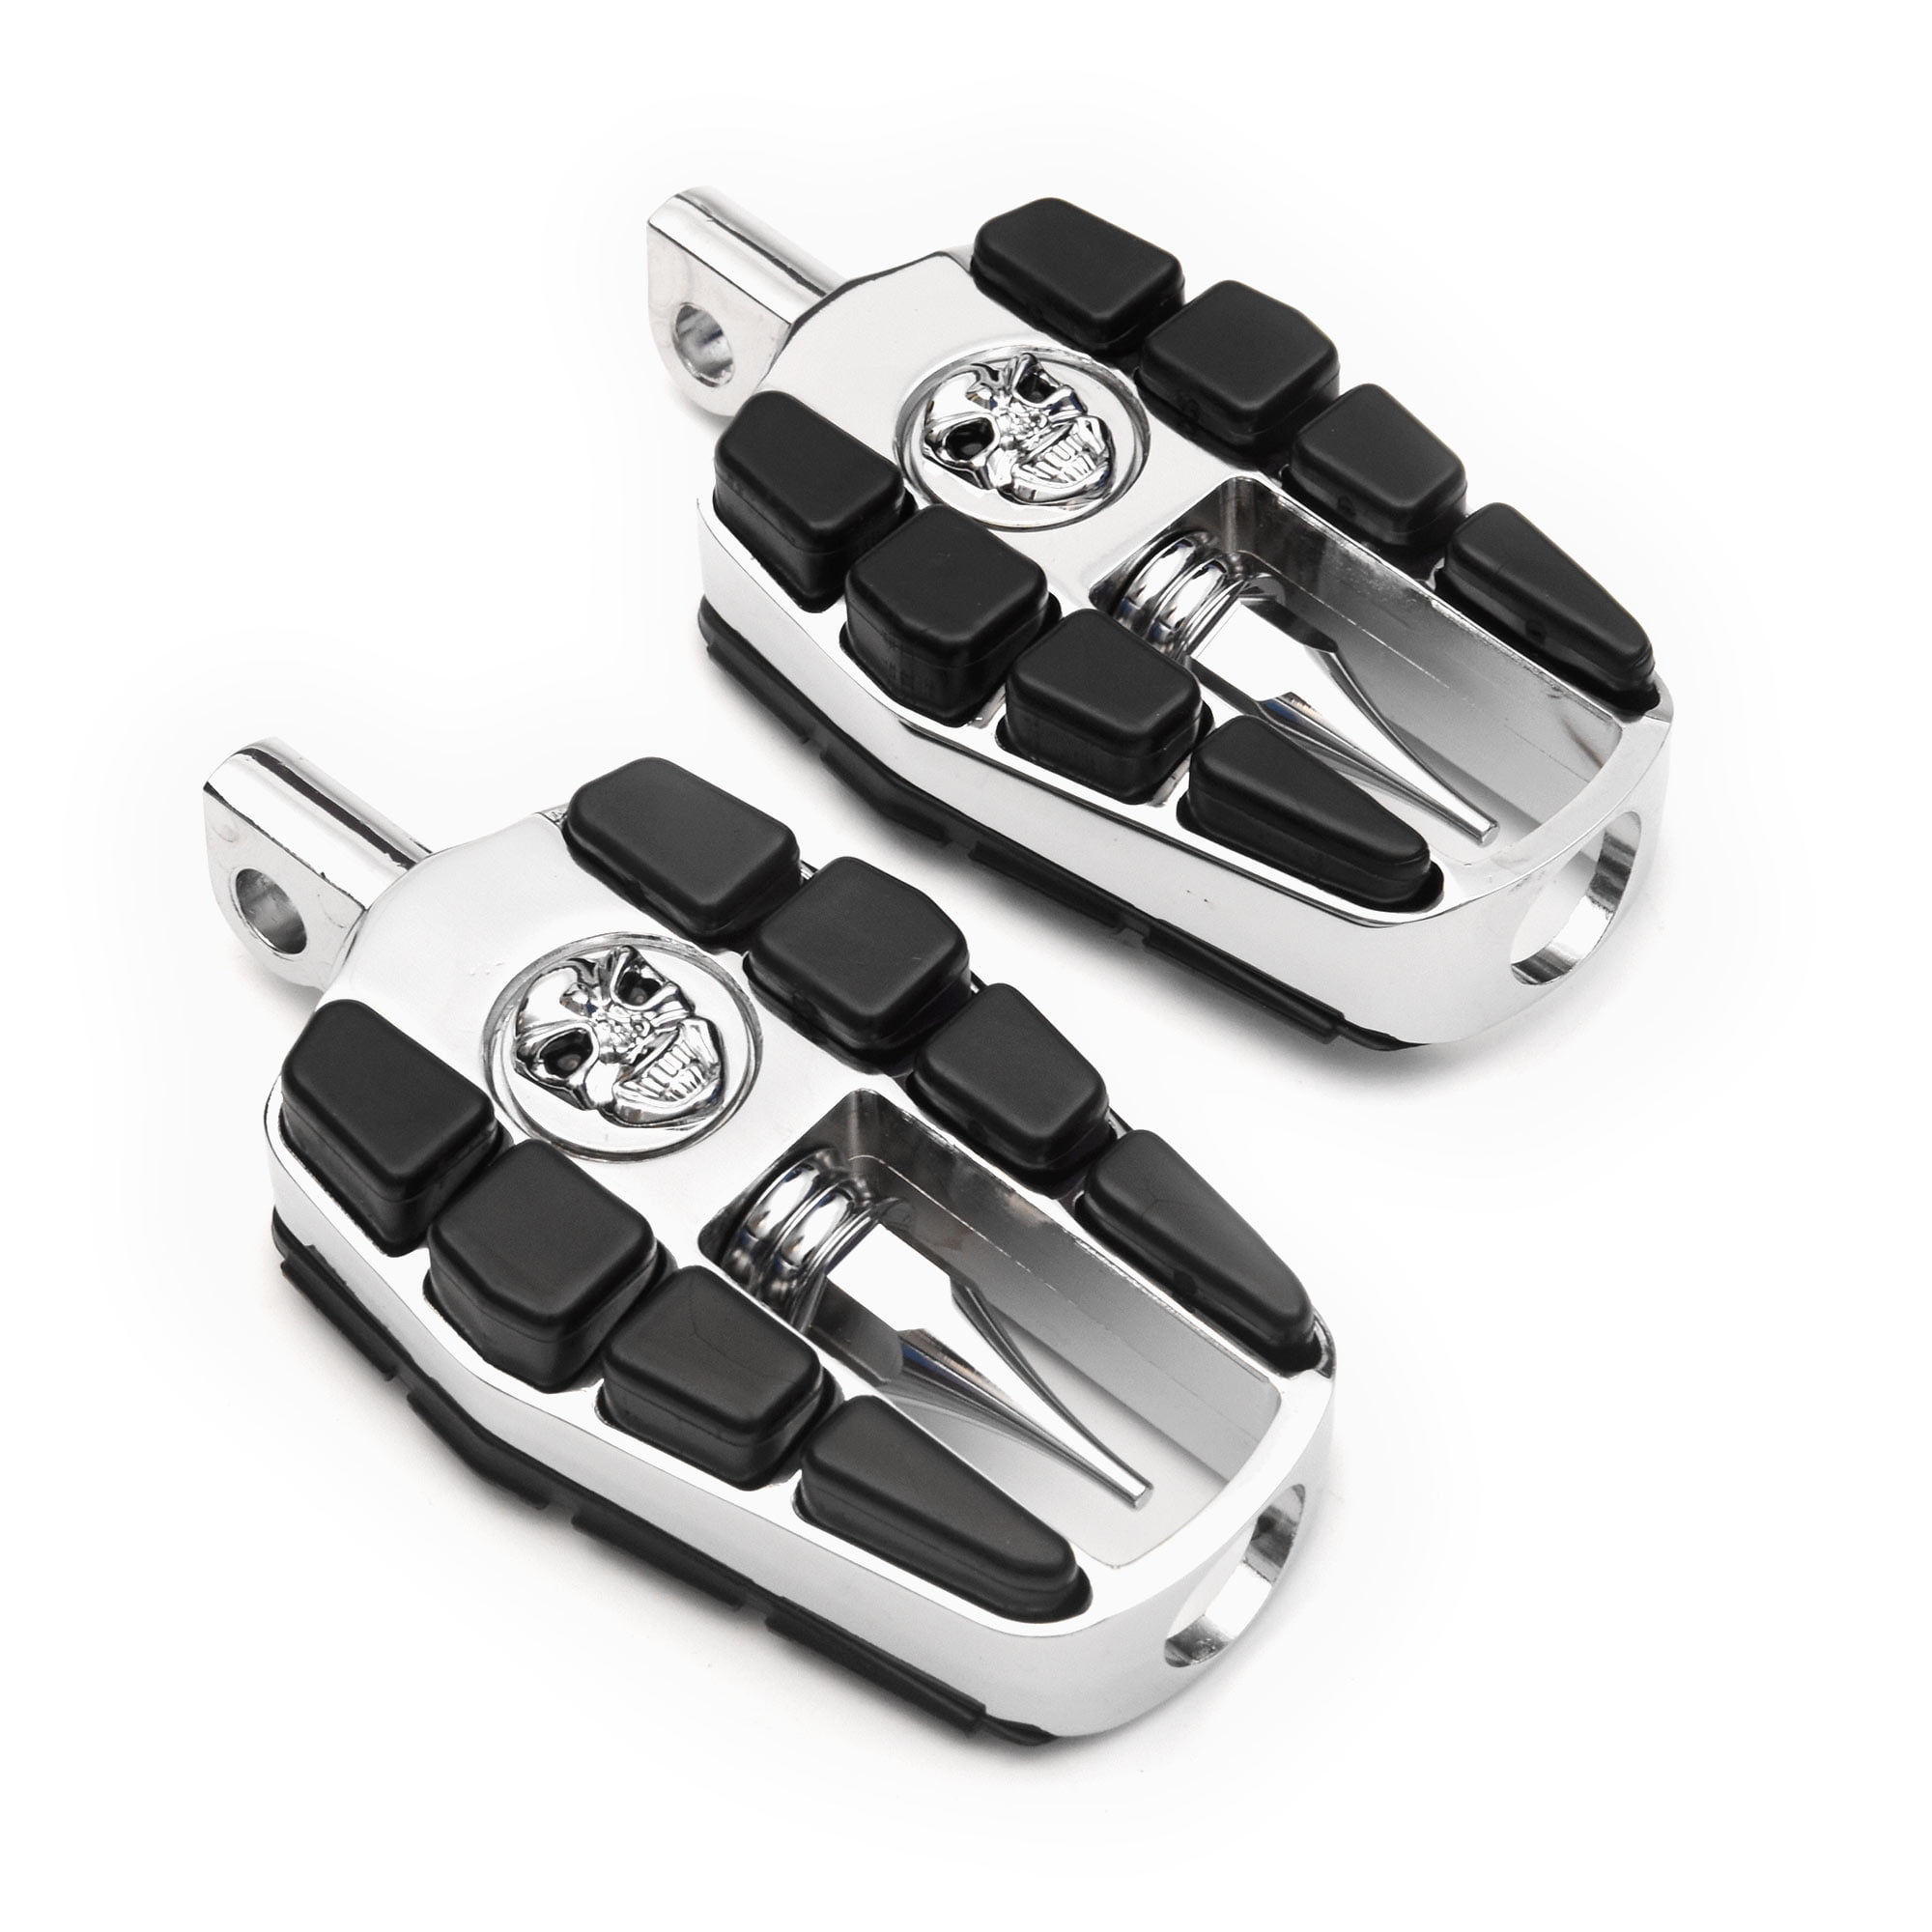 Skull Motorcycle Foot pegs For Harley Heritage Softail Classic FLSTC/Fat Boy